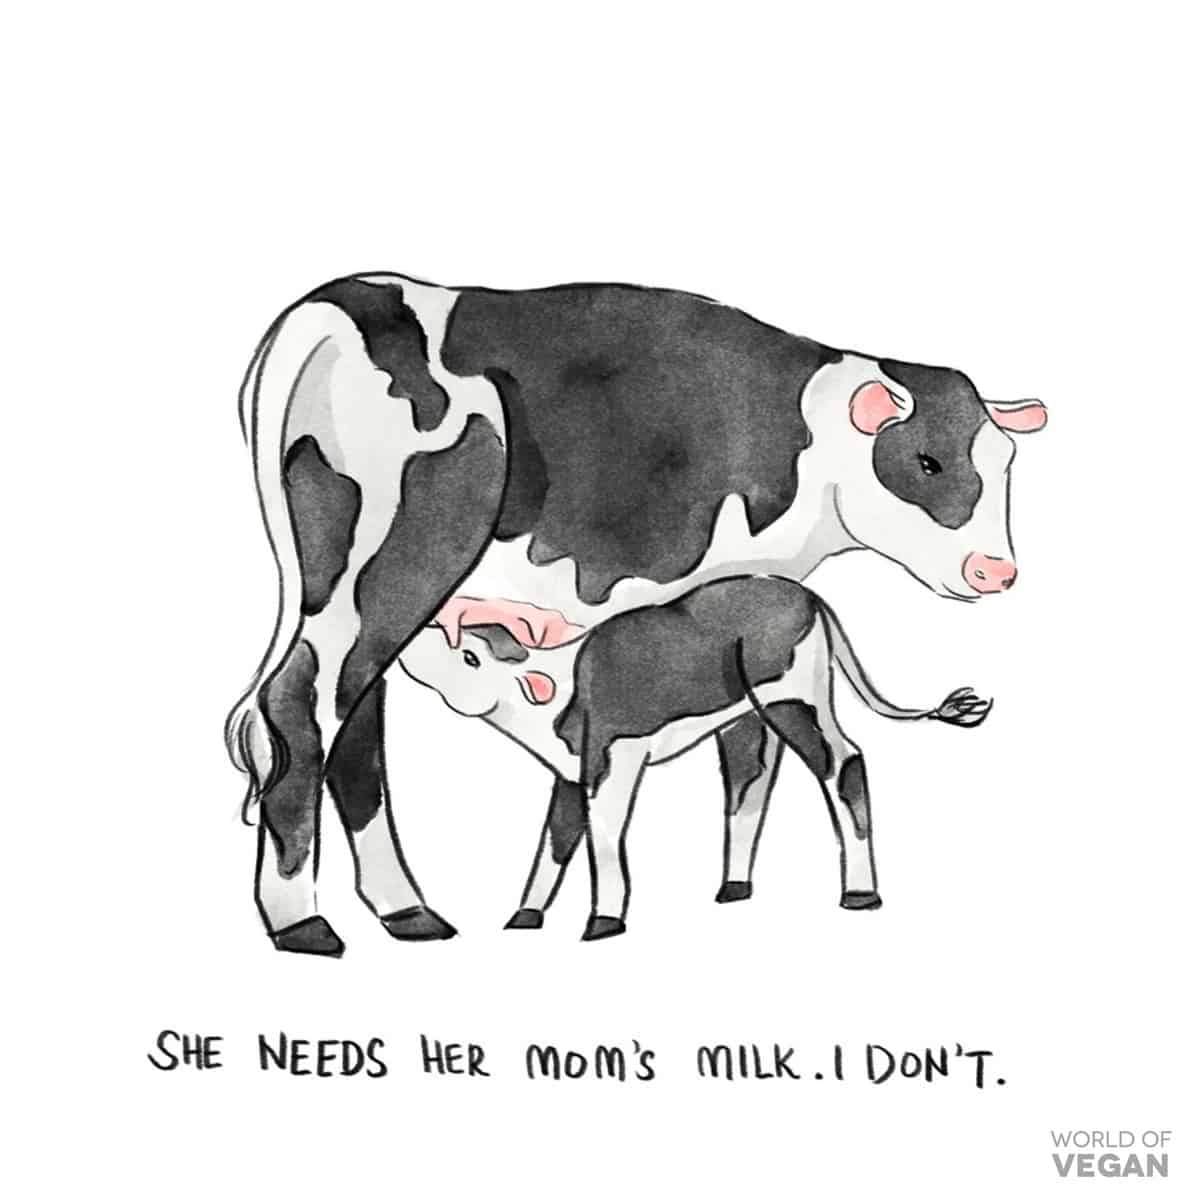 Vegan art illustration of a mama cow with her baby calf suckling, and the words "She needs her mom's milk—I don't."